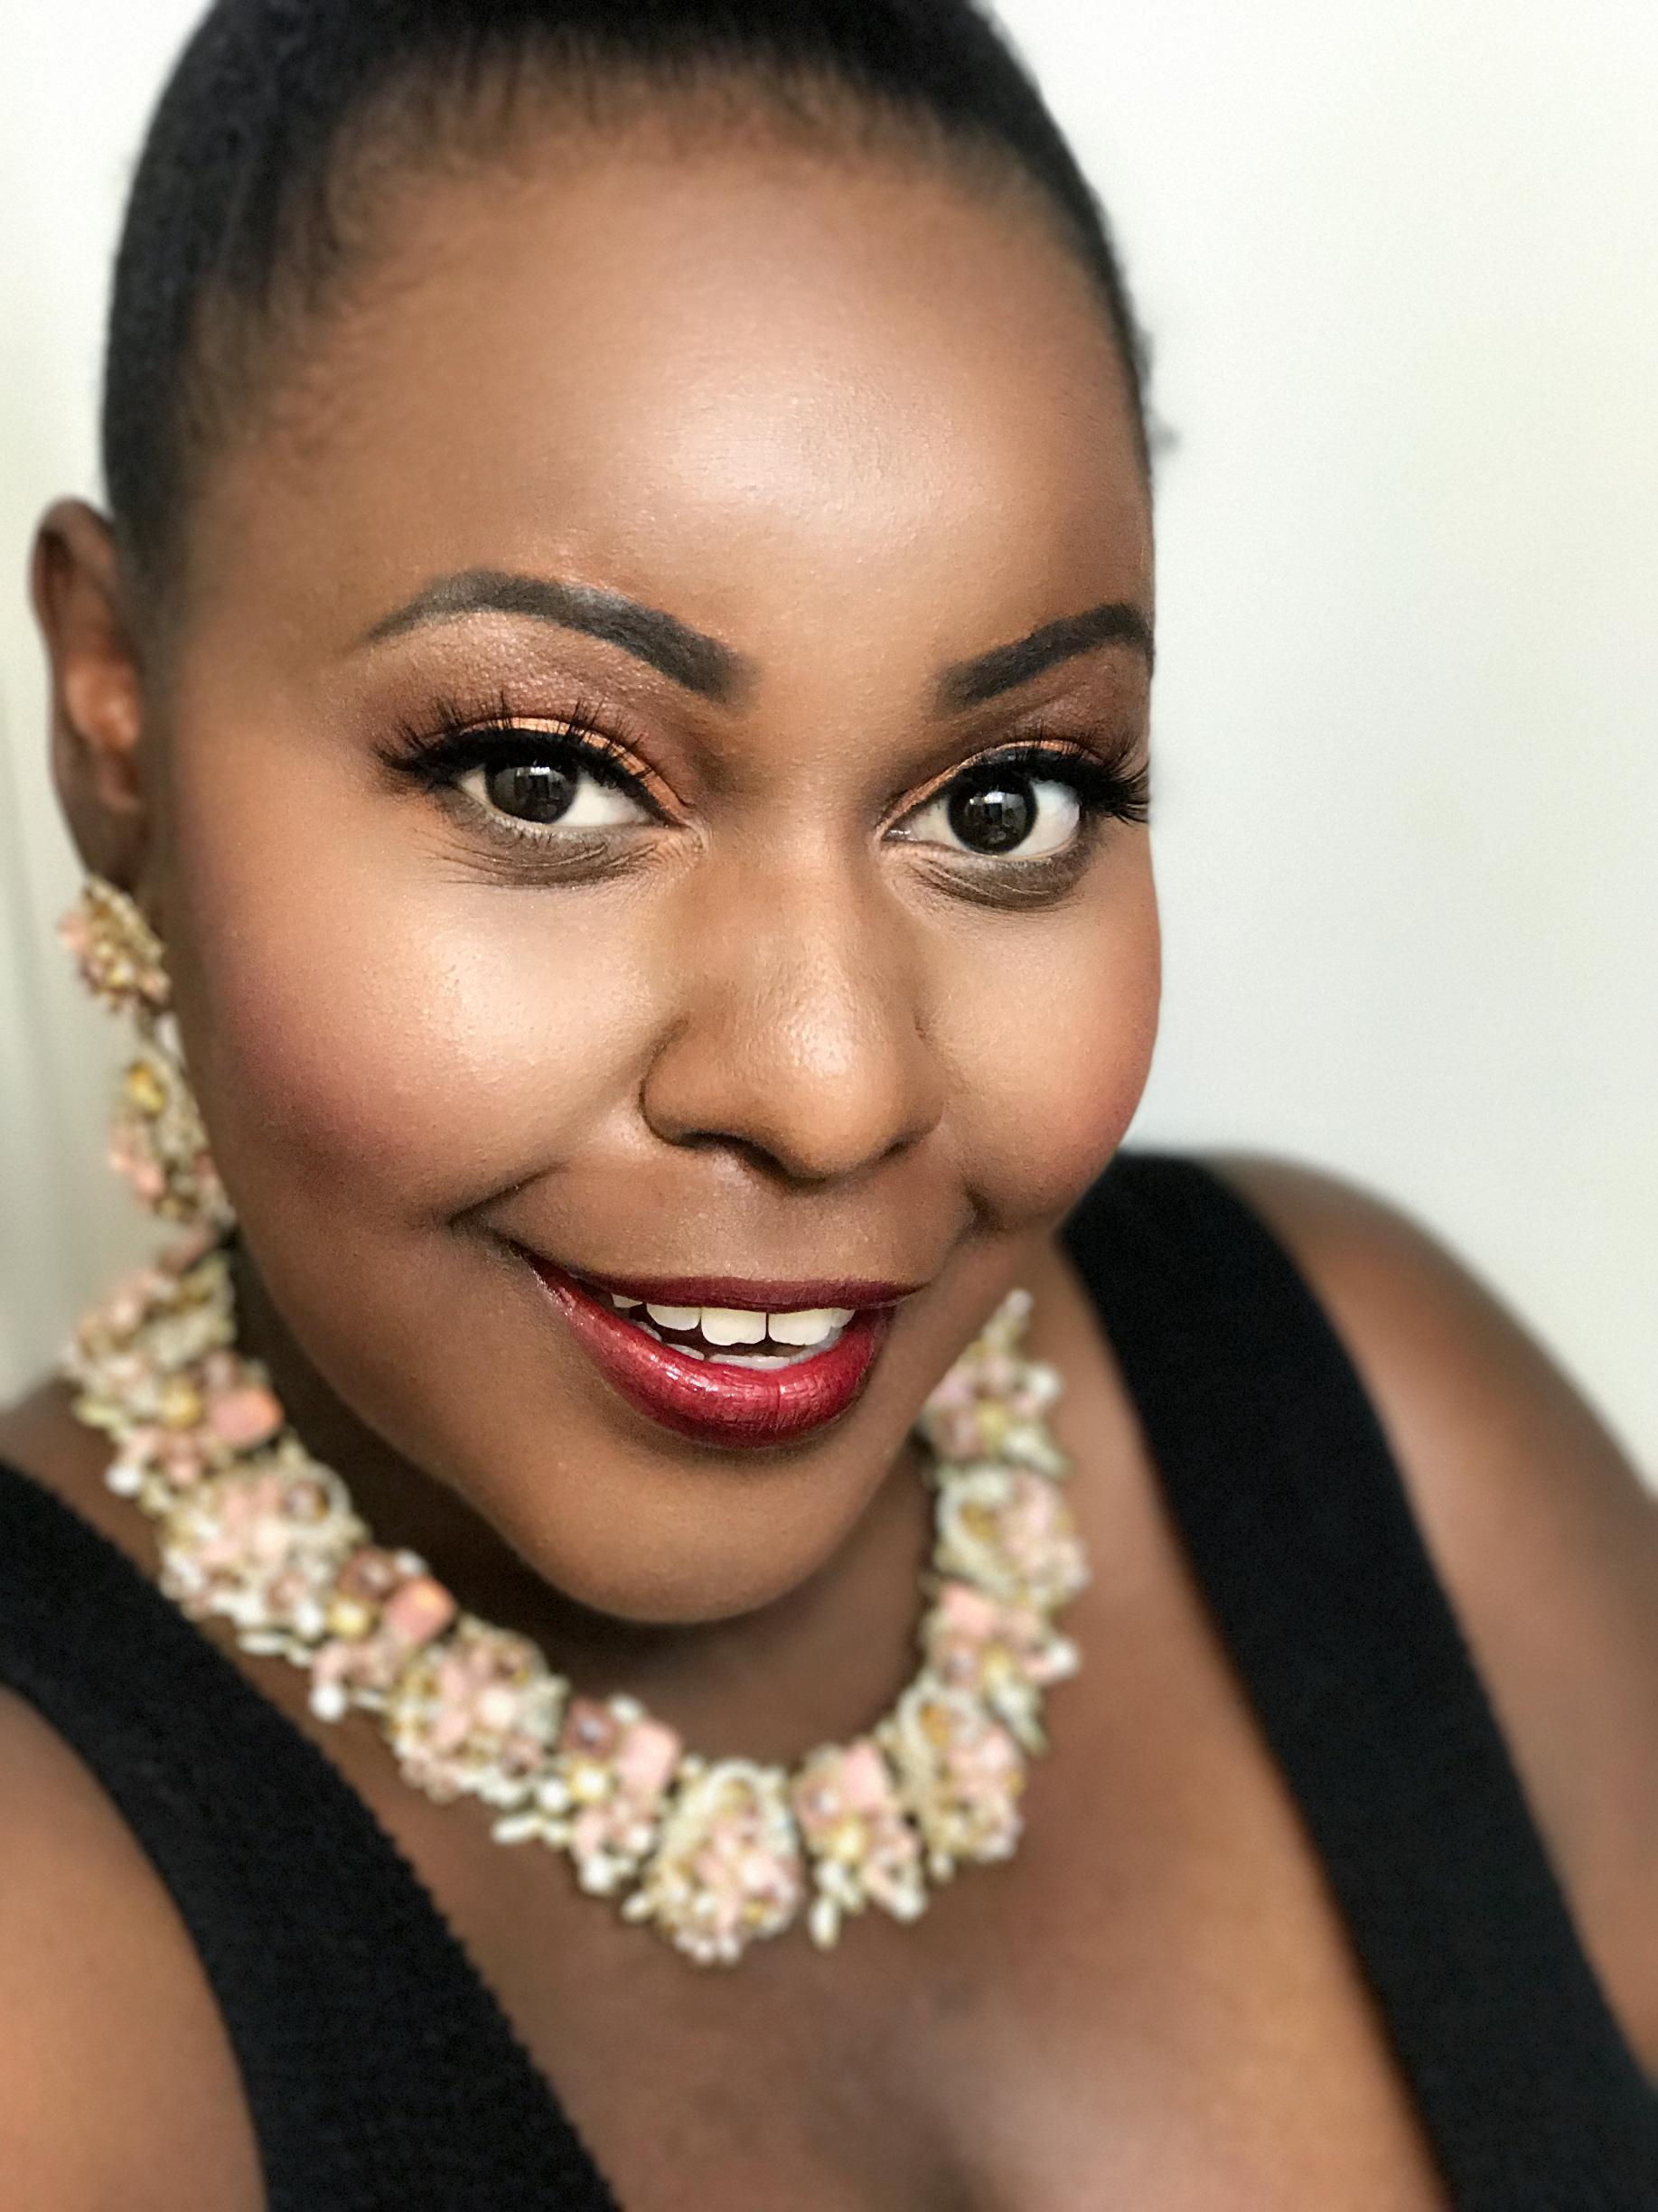 plus size fashion blogs 2017,  beautiful curvy girls,  how to fill the eye brow of a dark skin,  beautiful plus size dark skin girls, Arbonne beauty makeup review dark skin beauty blogger